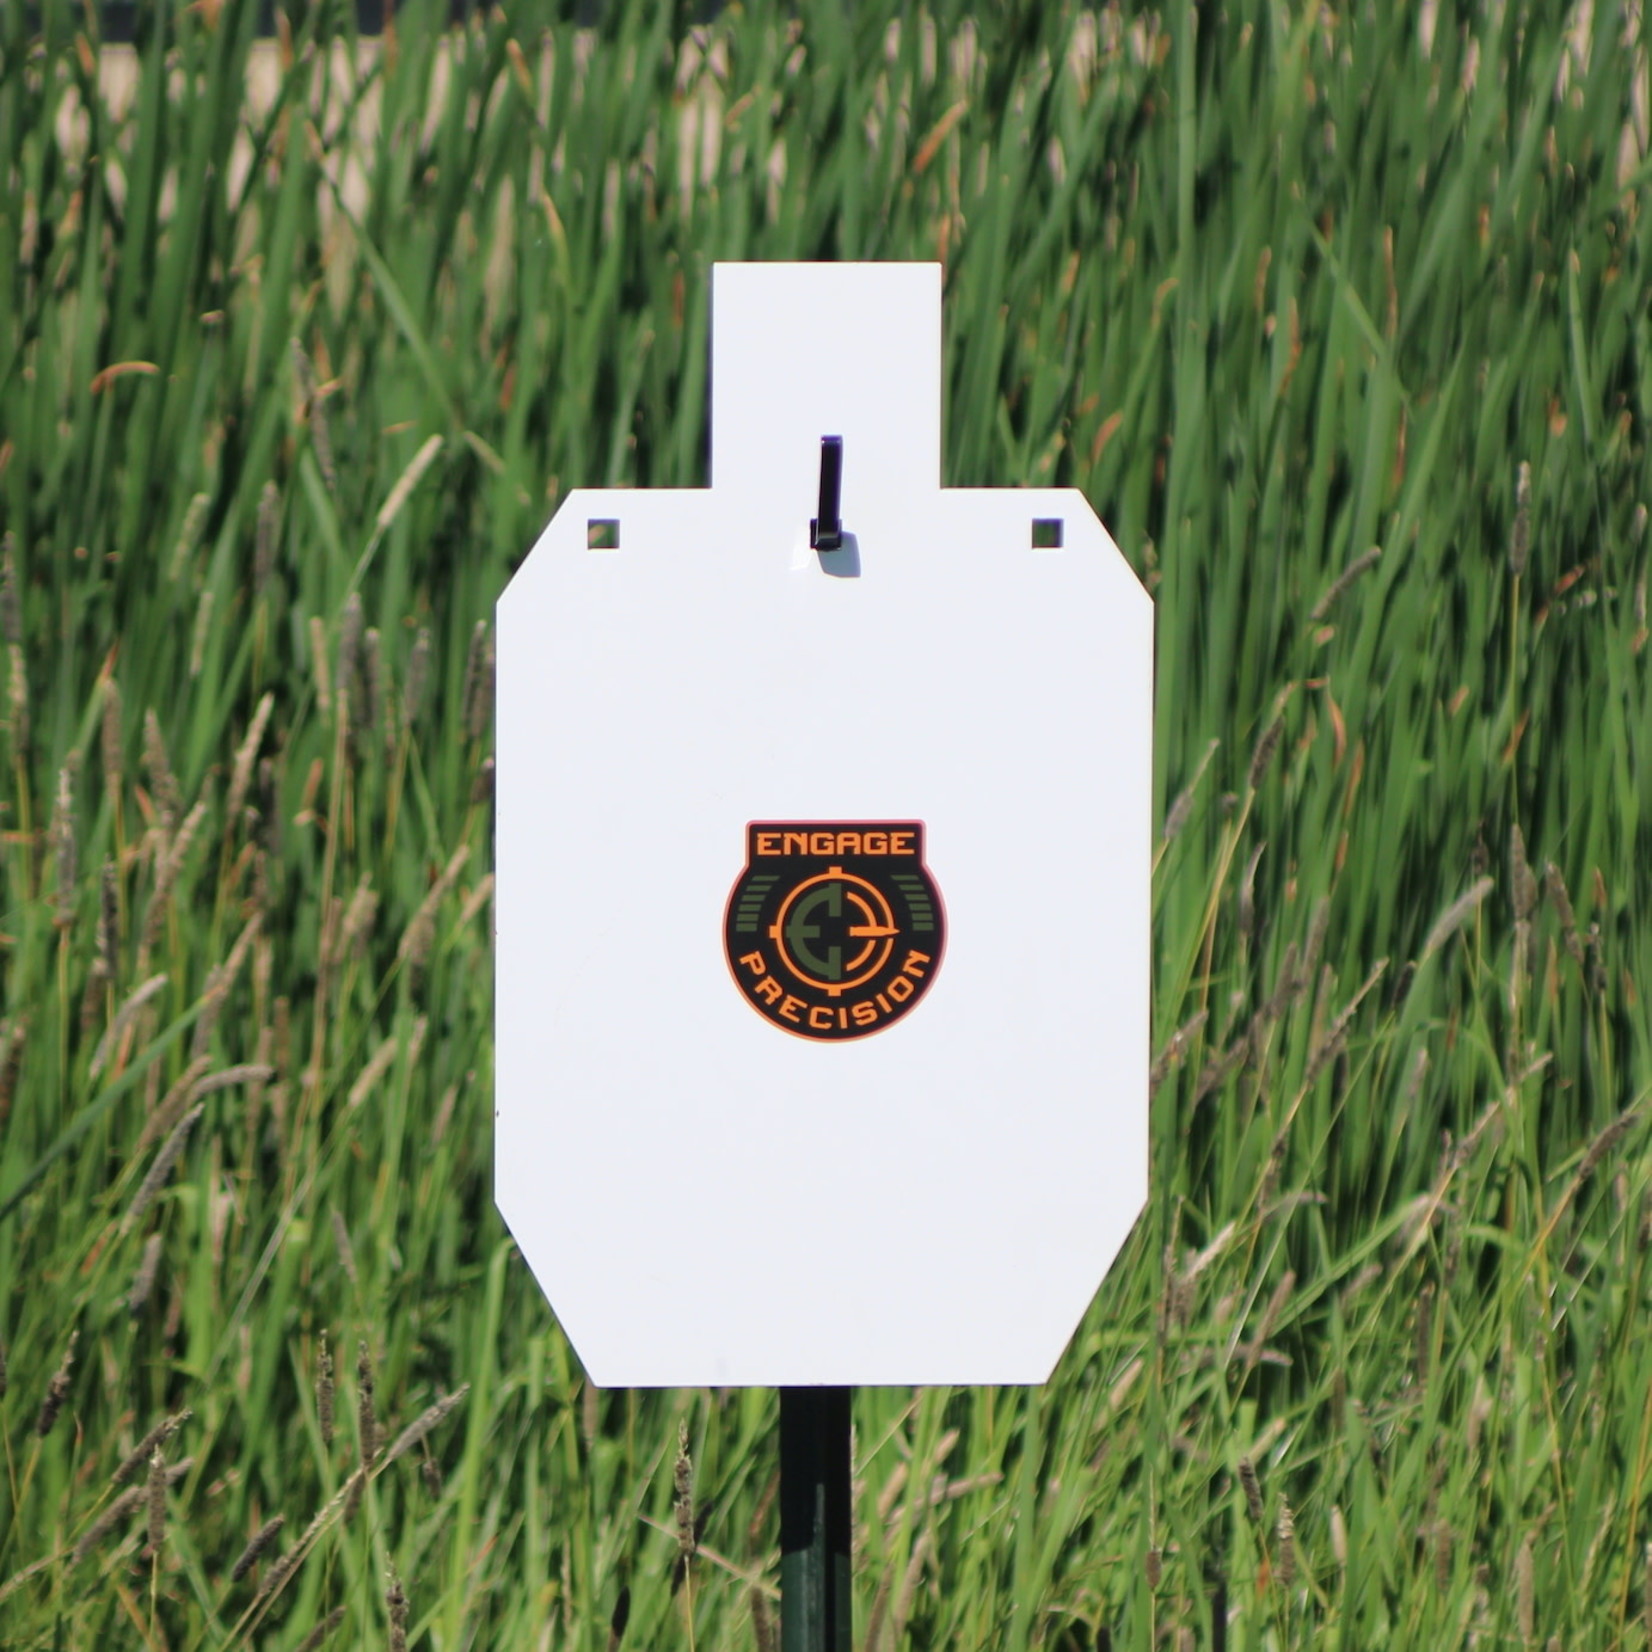 ENGAGE PRECISION ENGAGE PRECISION AR500 STEEL RIMFIRE TARGET SILHOUETTE, 1/4”, 1/2 SIZE IPSC, WHITE